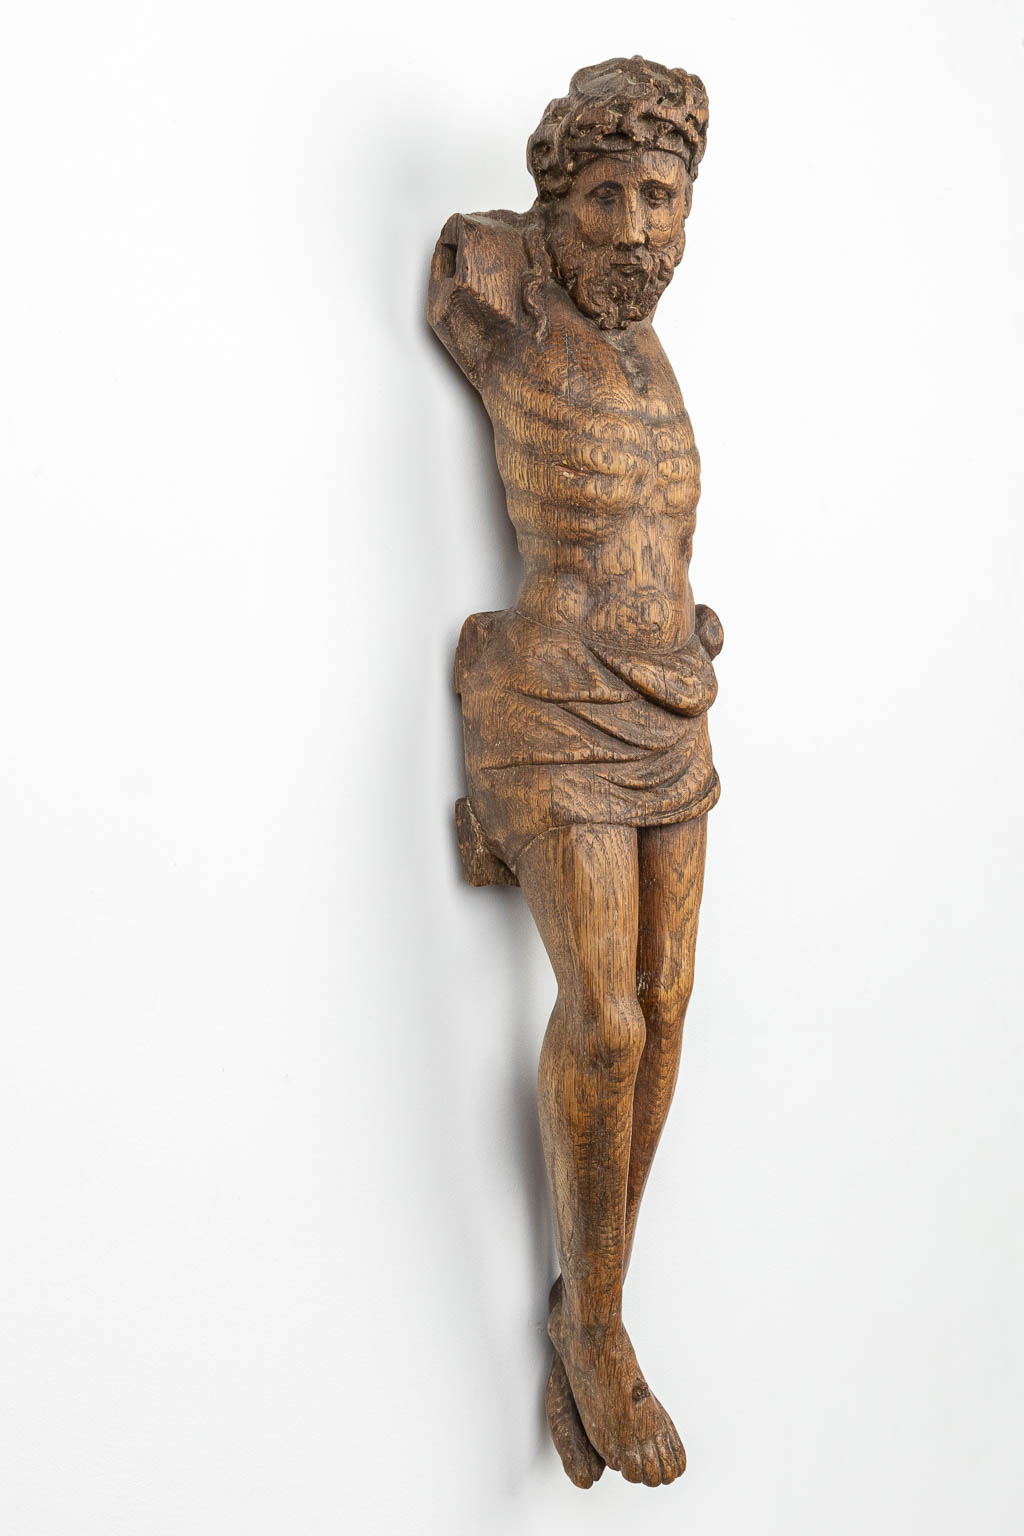 A wood sculptured corpus with a crown of thorns, 18th century. (H:76cm)